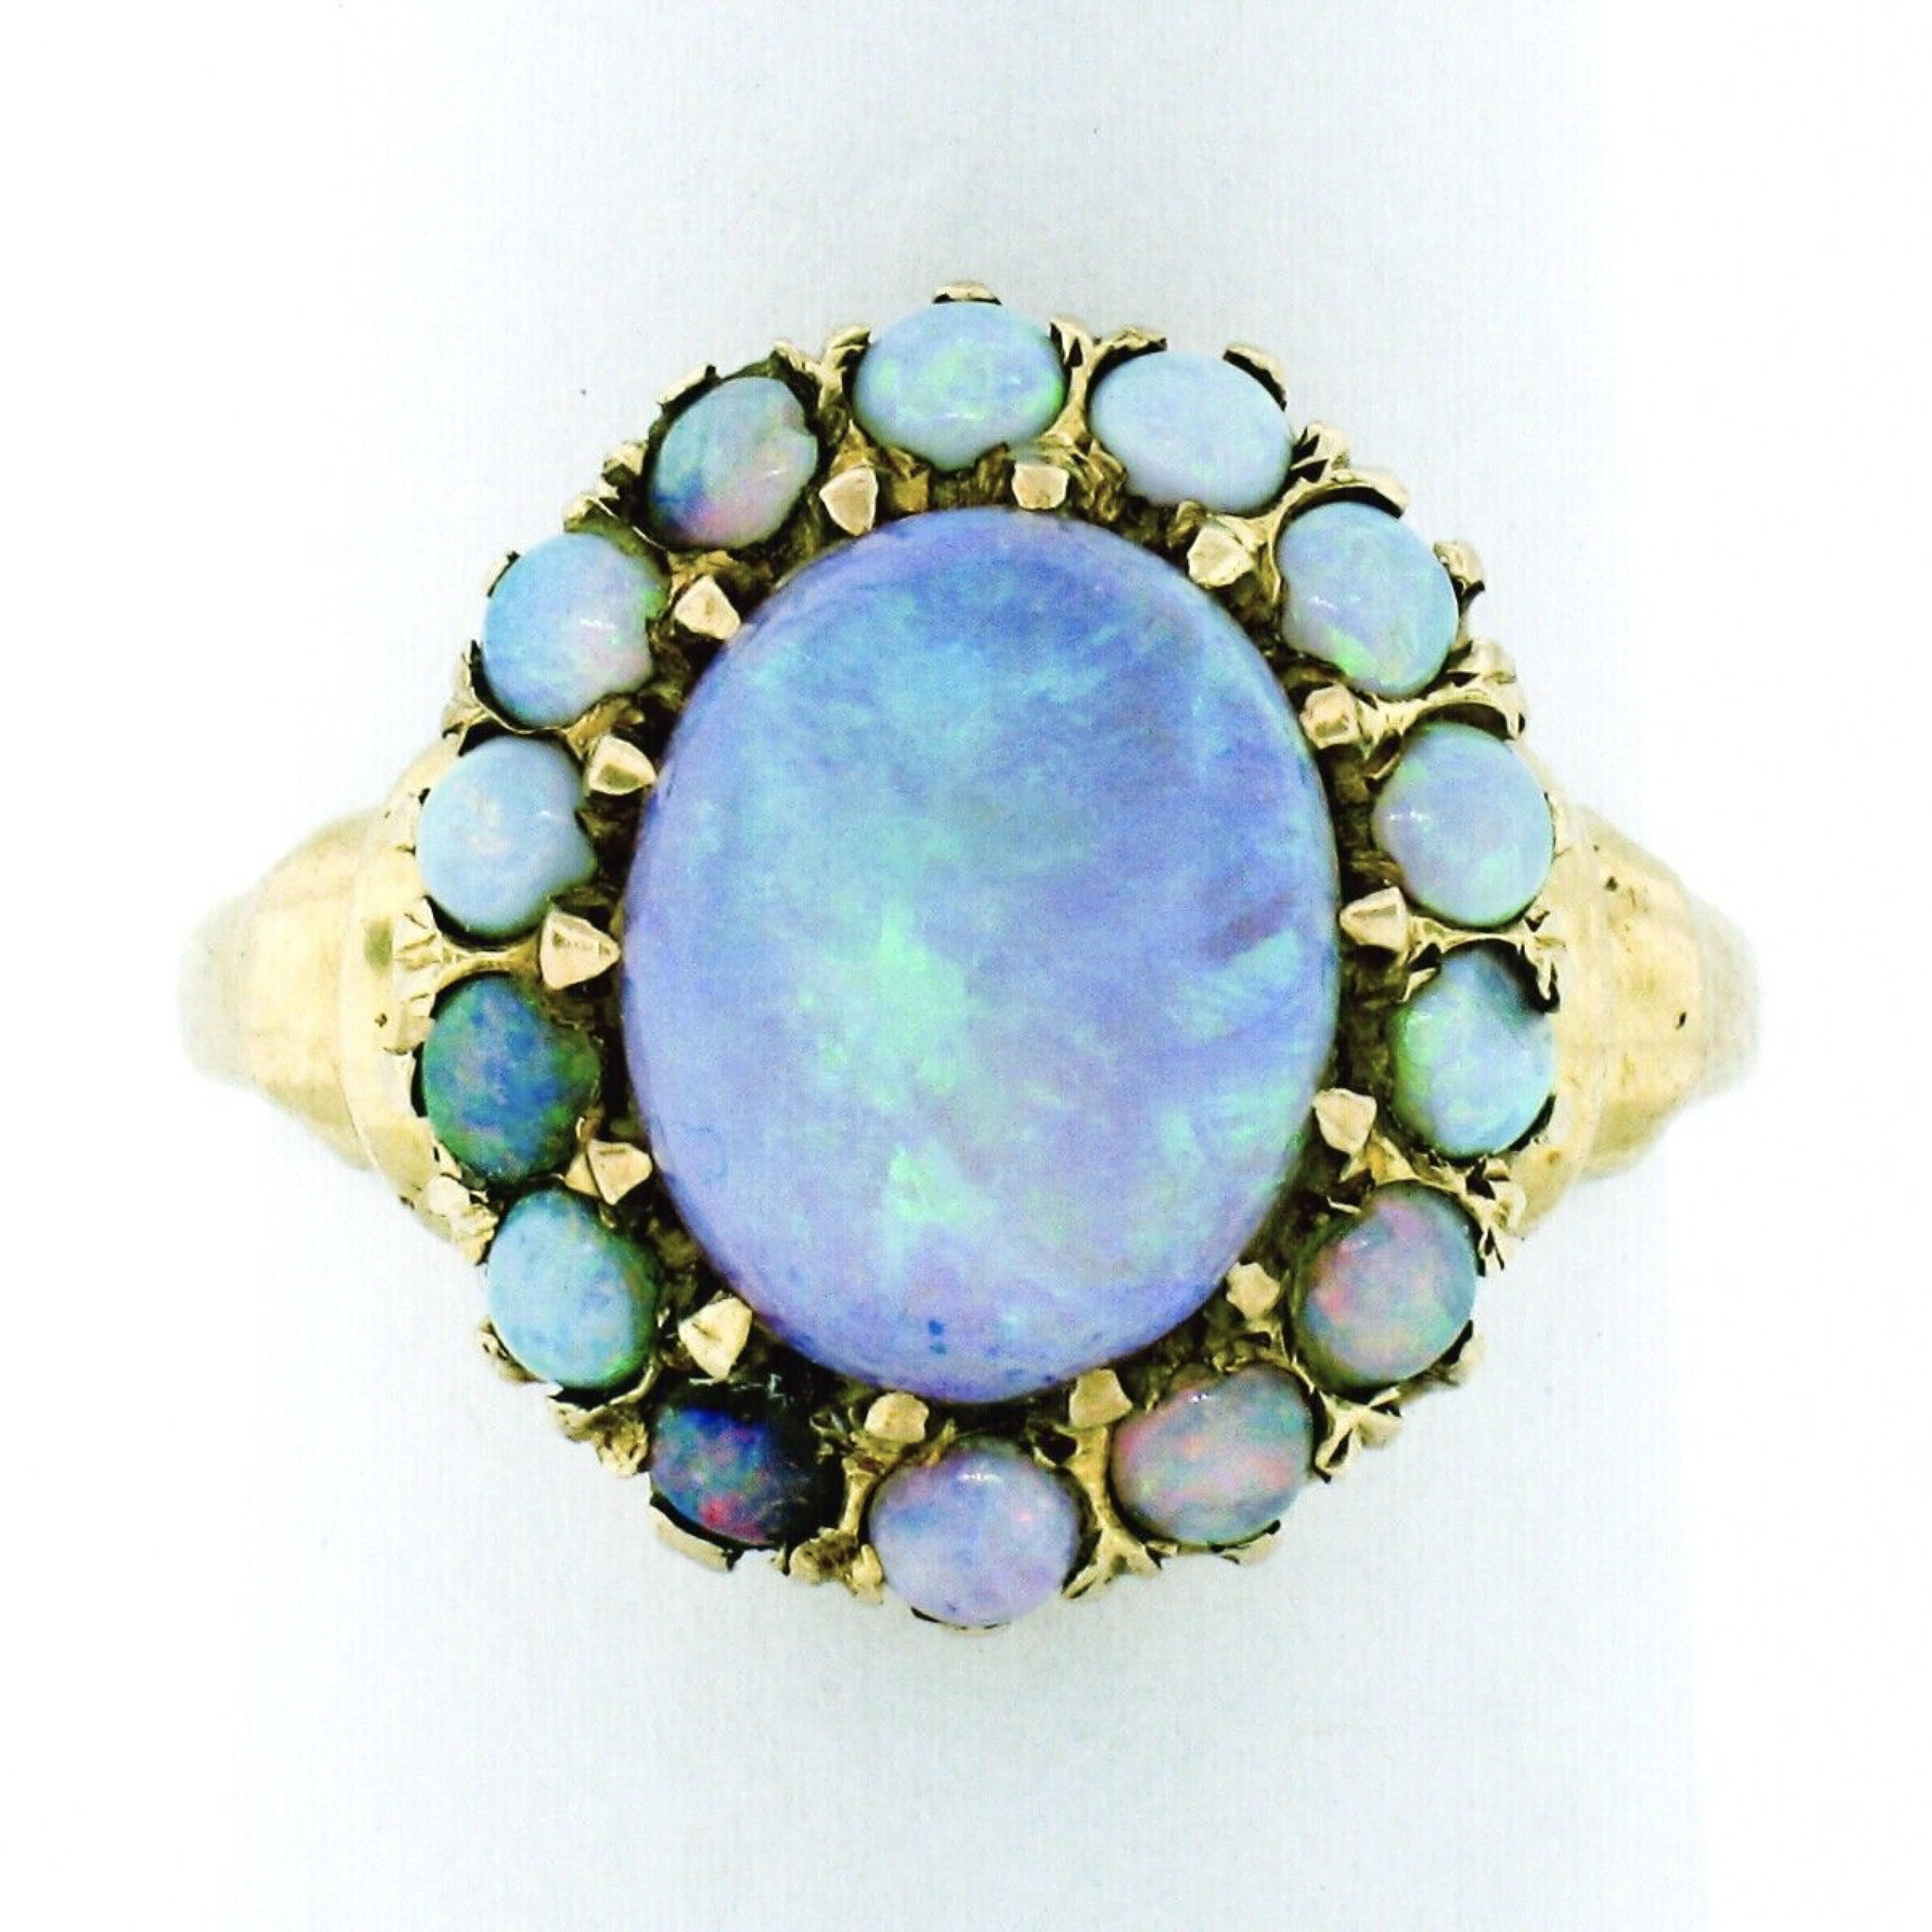 This gorgeous, hand made, antique piece was crafted in solid 14k yellow gold during the Victorian period. It features a stunning oval cabochon opal stone having a translucent white base color and displays the most amazing green and violet play